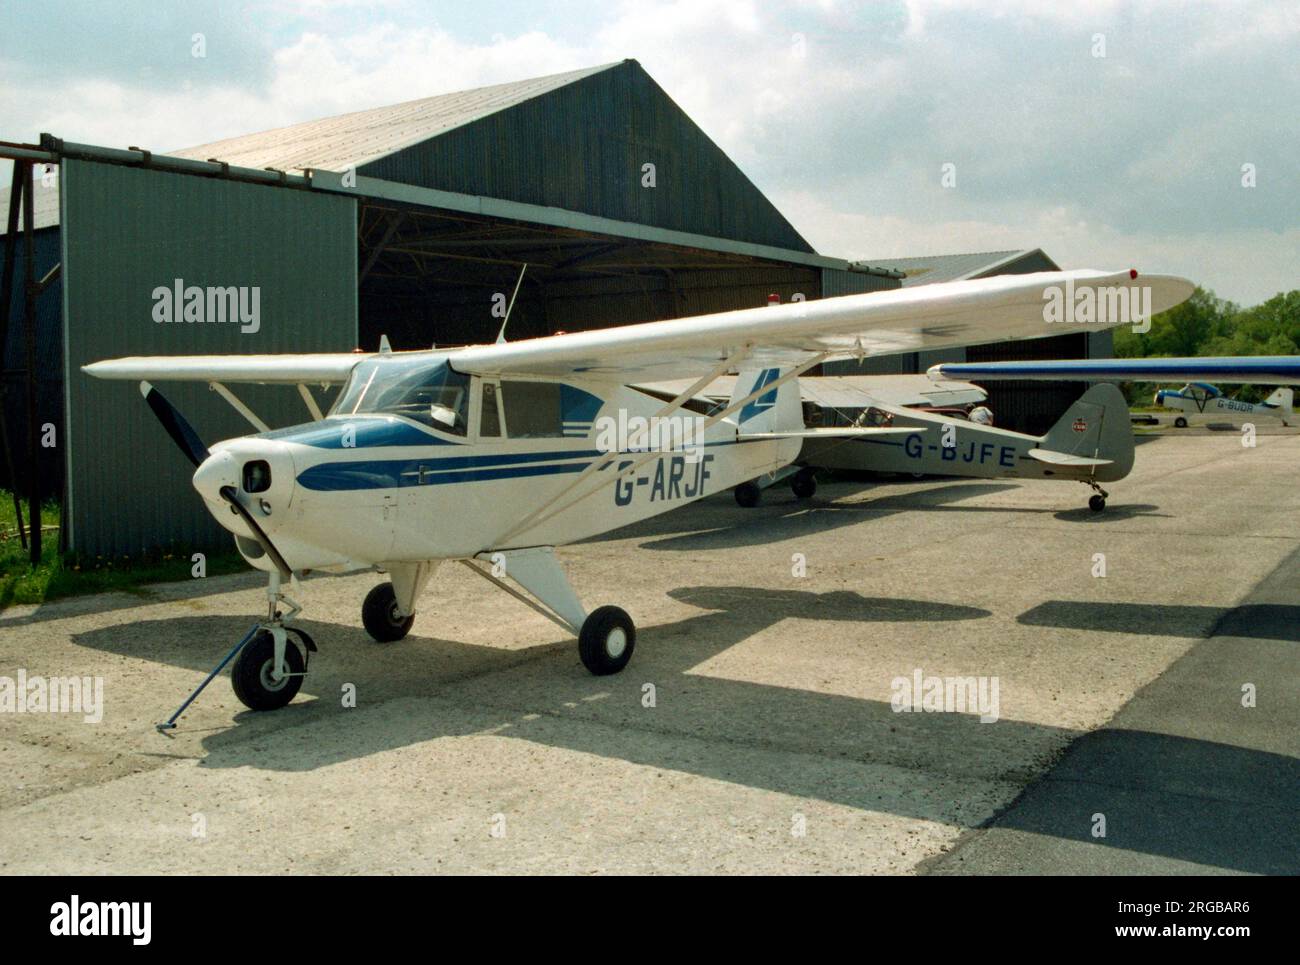 Piper PA-22-108 Tri-Pacer G-ARJF (msn 22-8199). Stock Photo